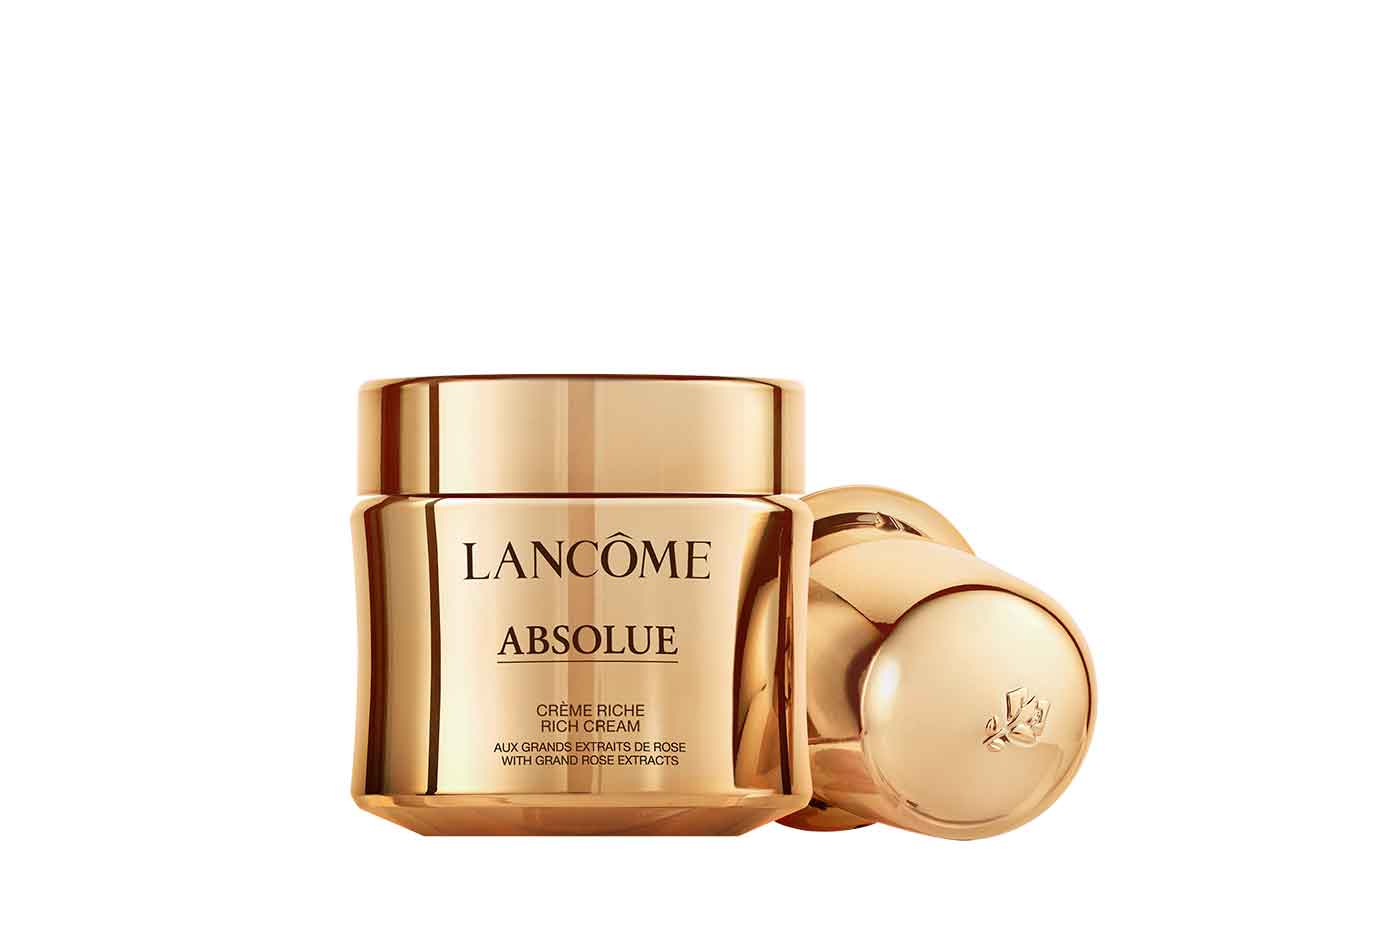 L’Oreal relaunches Lancome in India